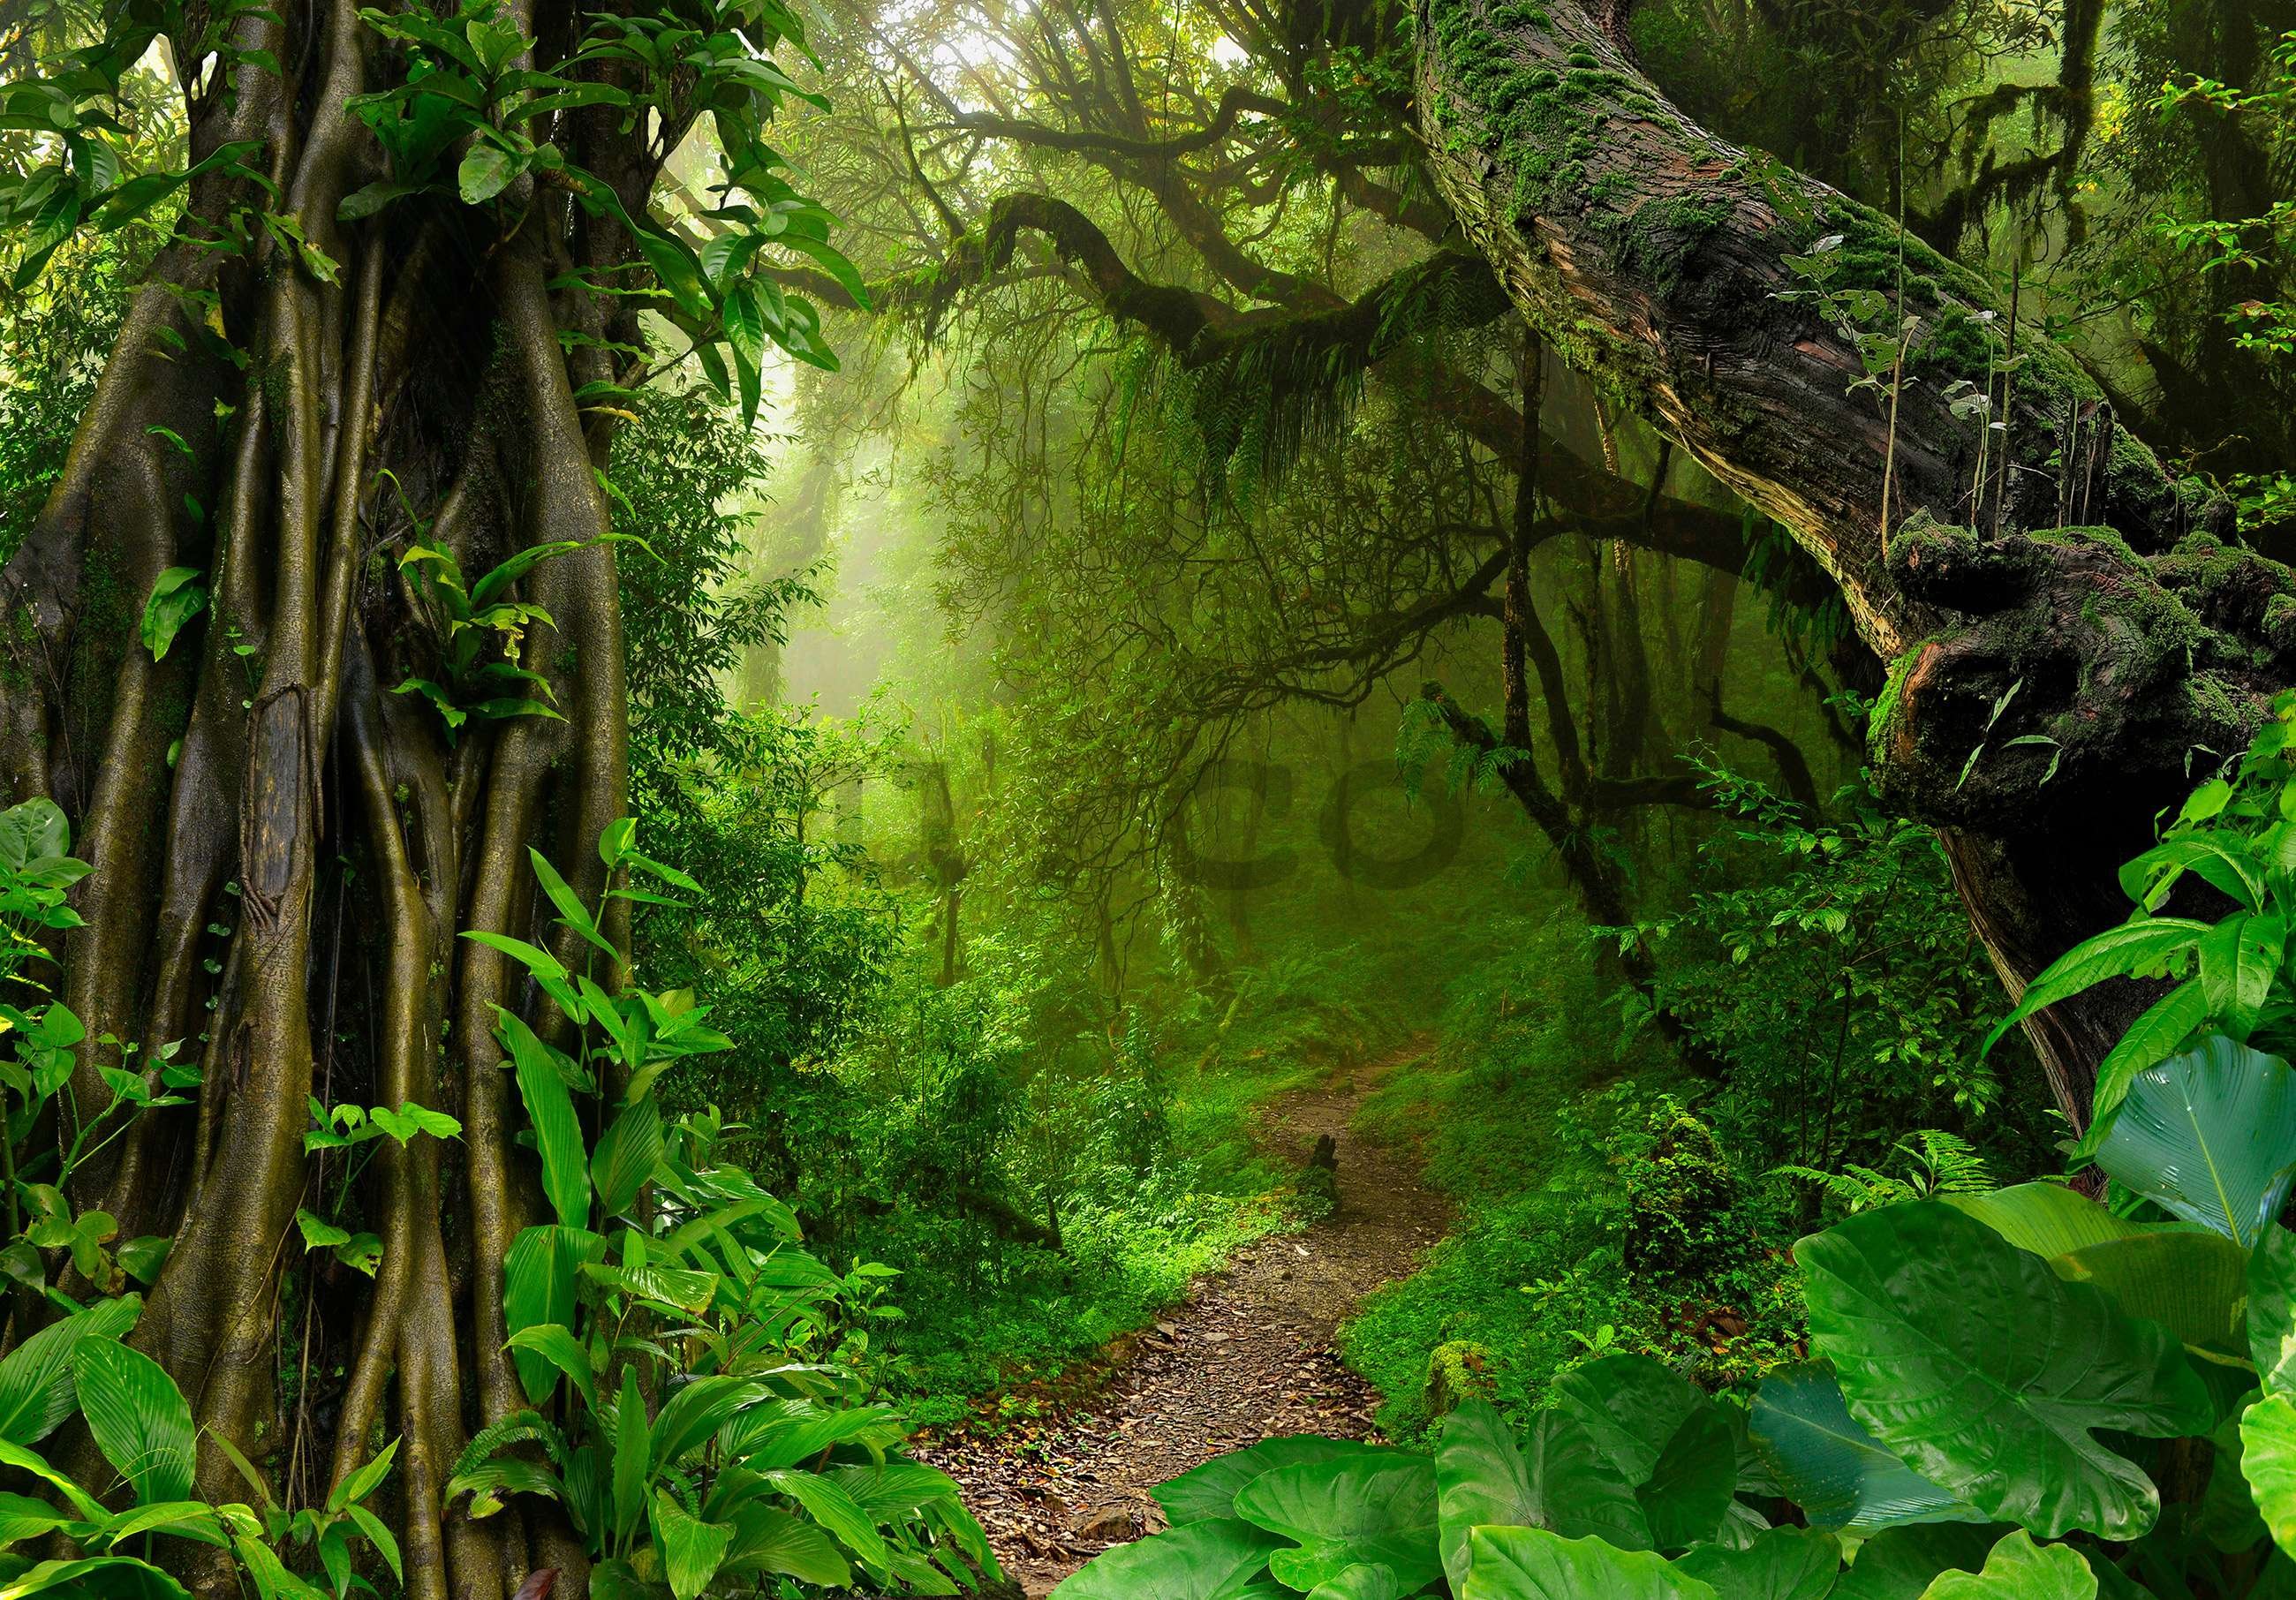 Wall mural vlies: Path in the forest - 104x70,5cm